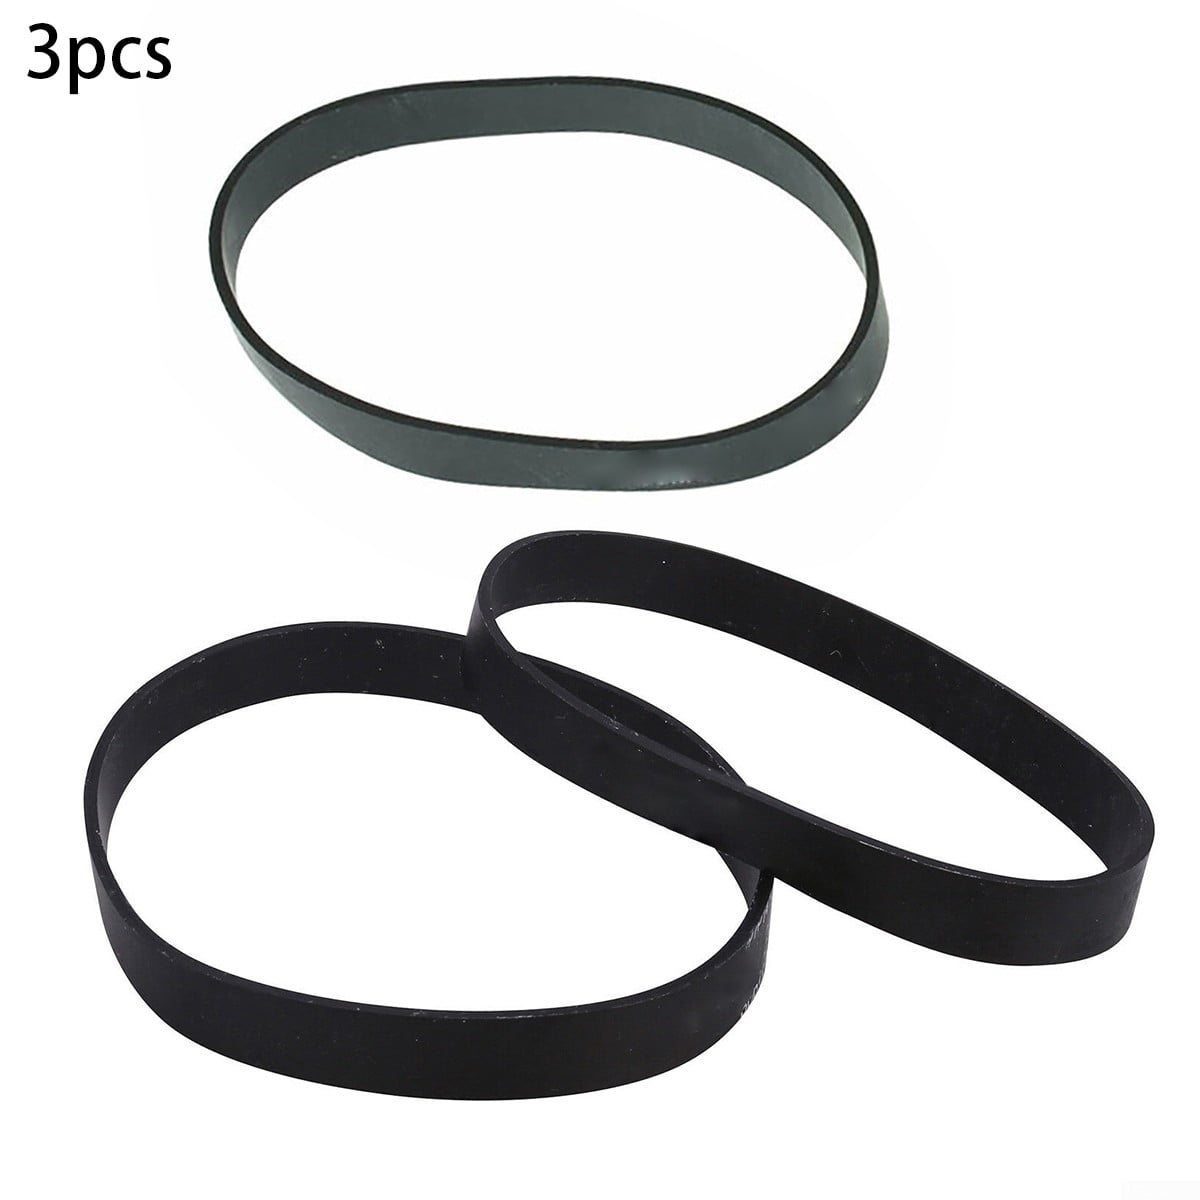 2pcs Vacuum Cleaner Belt UH70935 UH70200 UH71230 Replacement Belts High quality 